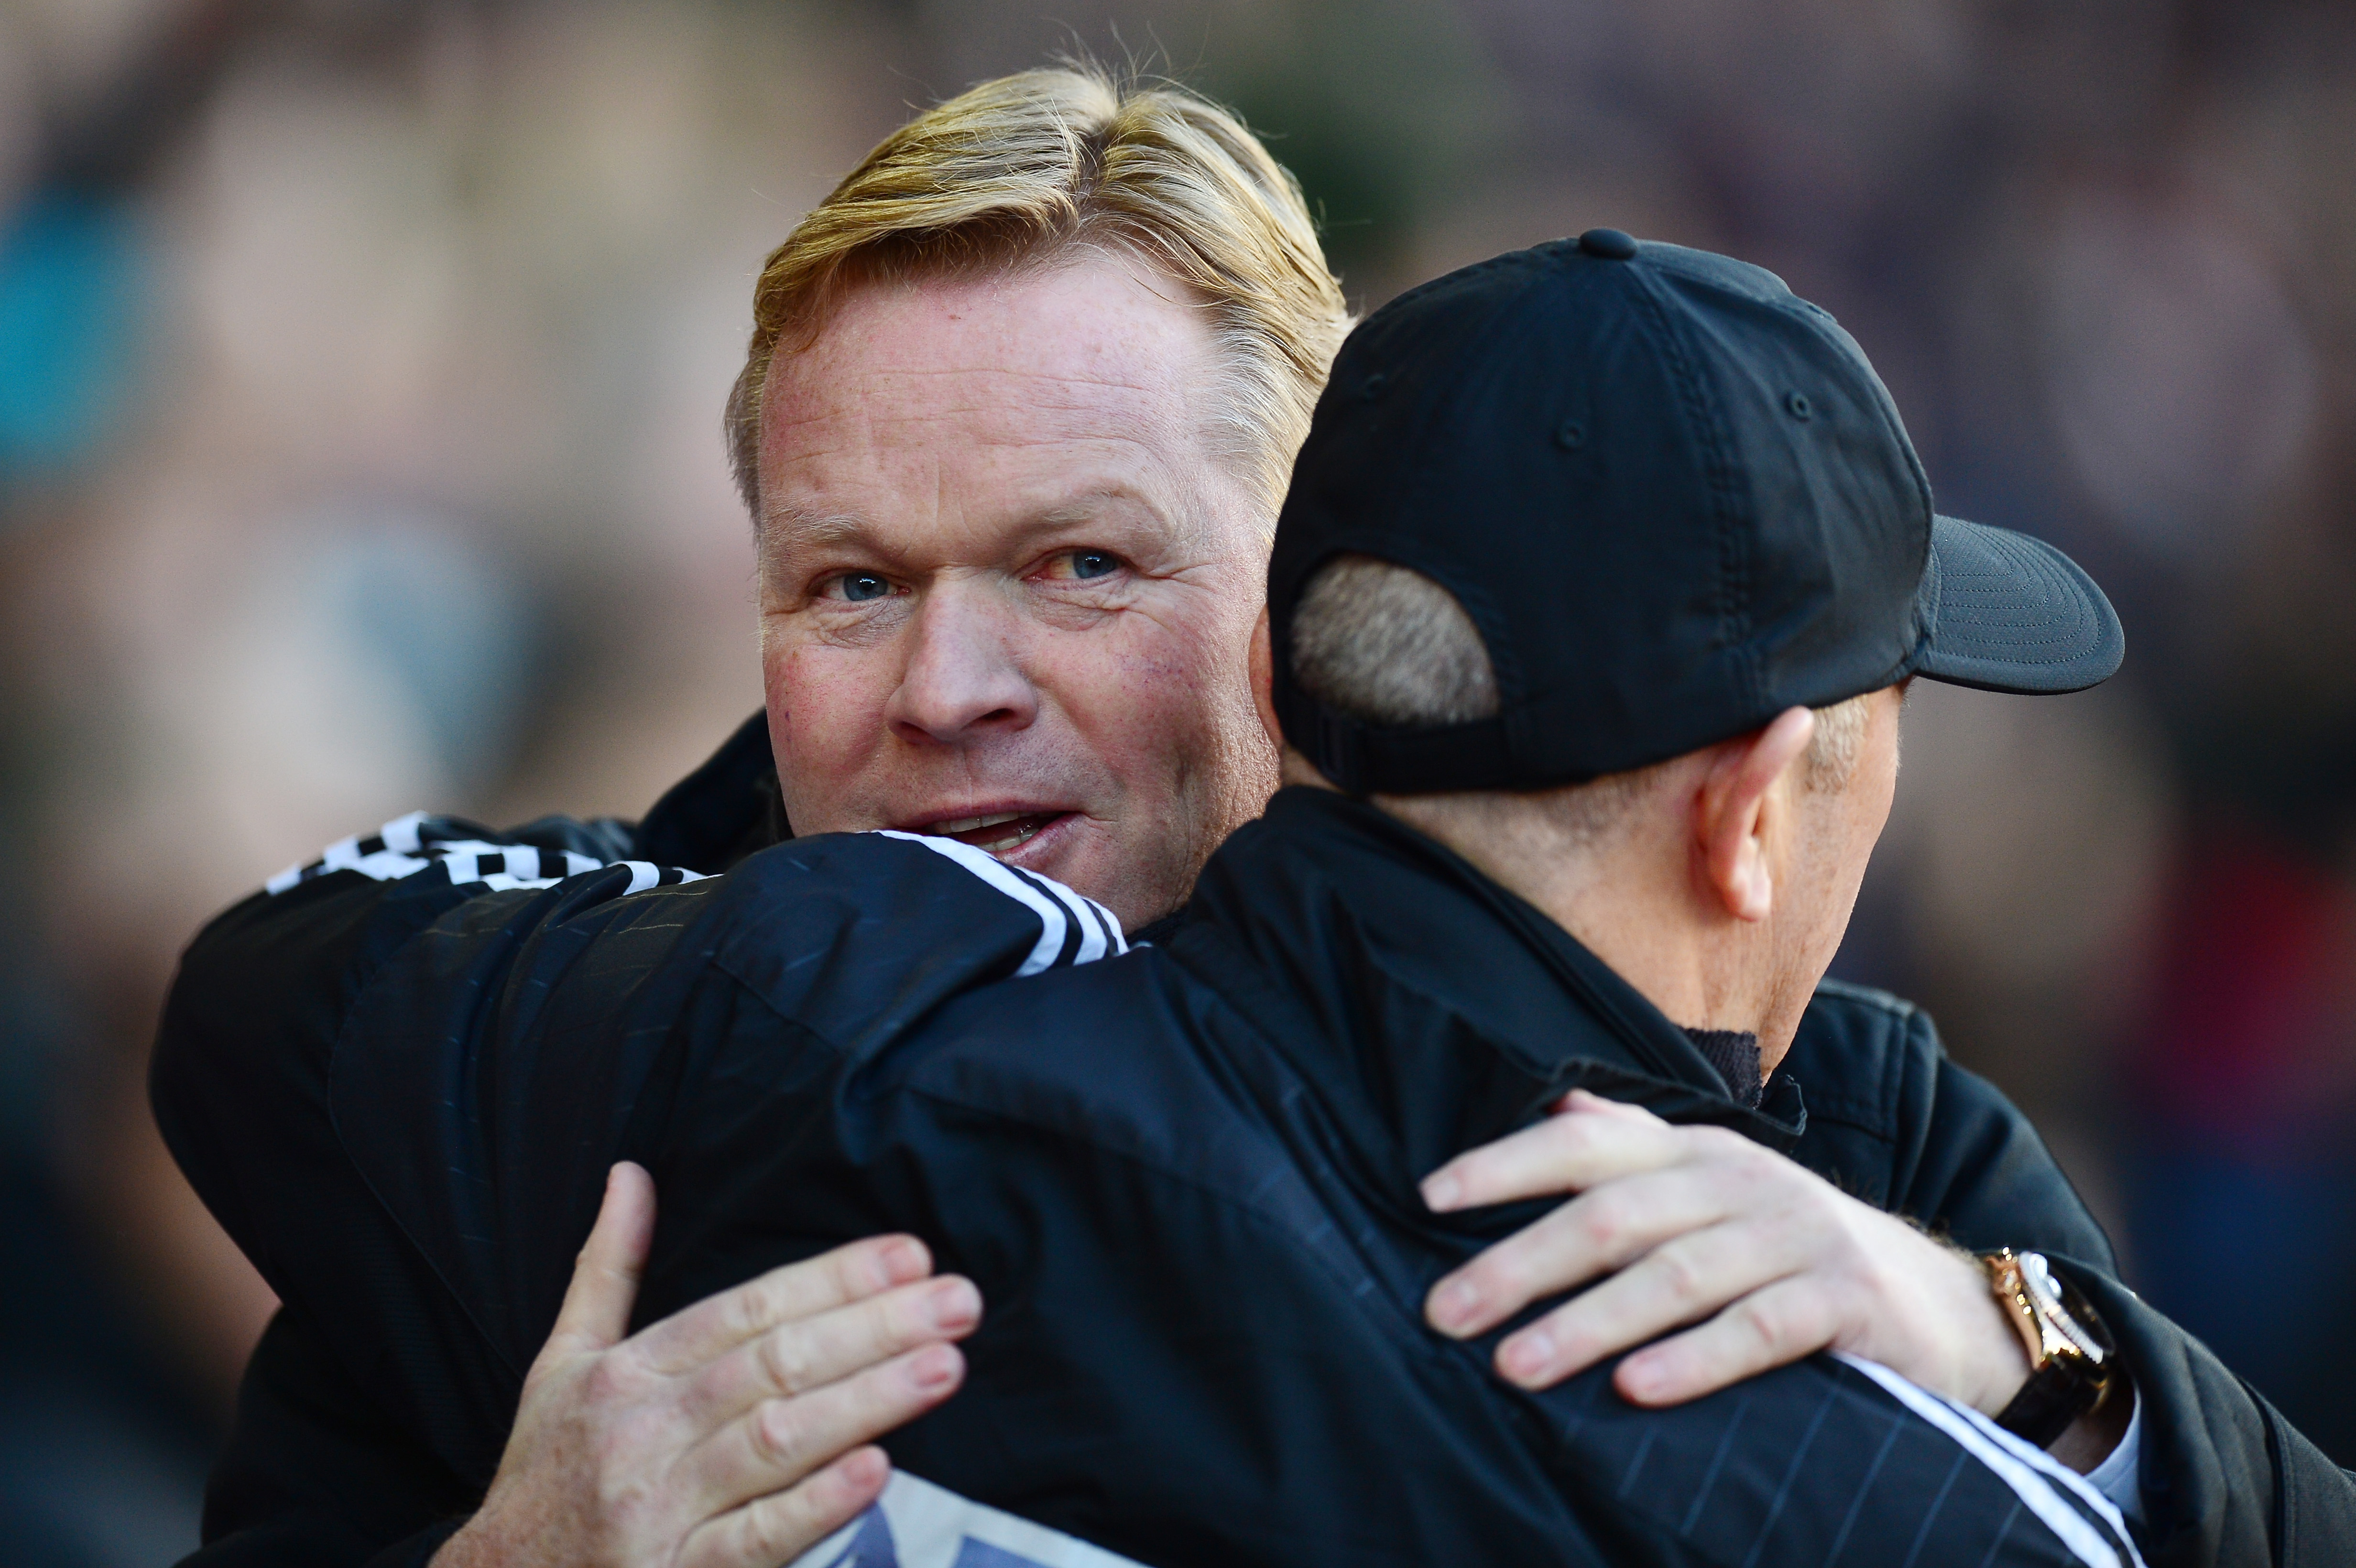 SOUTHAMPTON, ENGLAND - JANUARY 16: Ronald Koeman manager of Southampton and Tony Pulis manager of West Bromwich Albion greet prior to the Barclays Premier League match between Southampton and West Bromwich Albion at St. Mary's Stadium on January 16, 2016 in Southampton, England. (Photo by Dan Mullan/Getty Images)